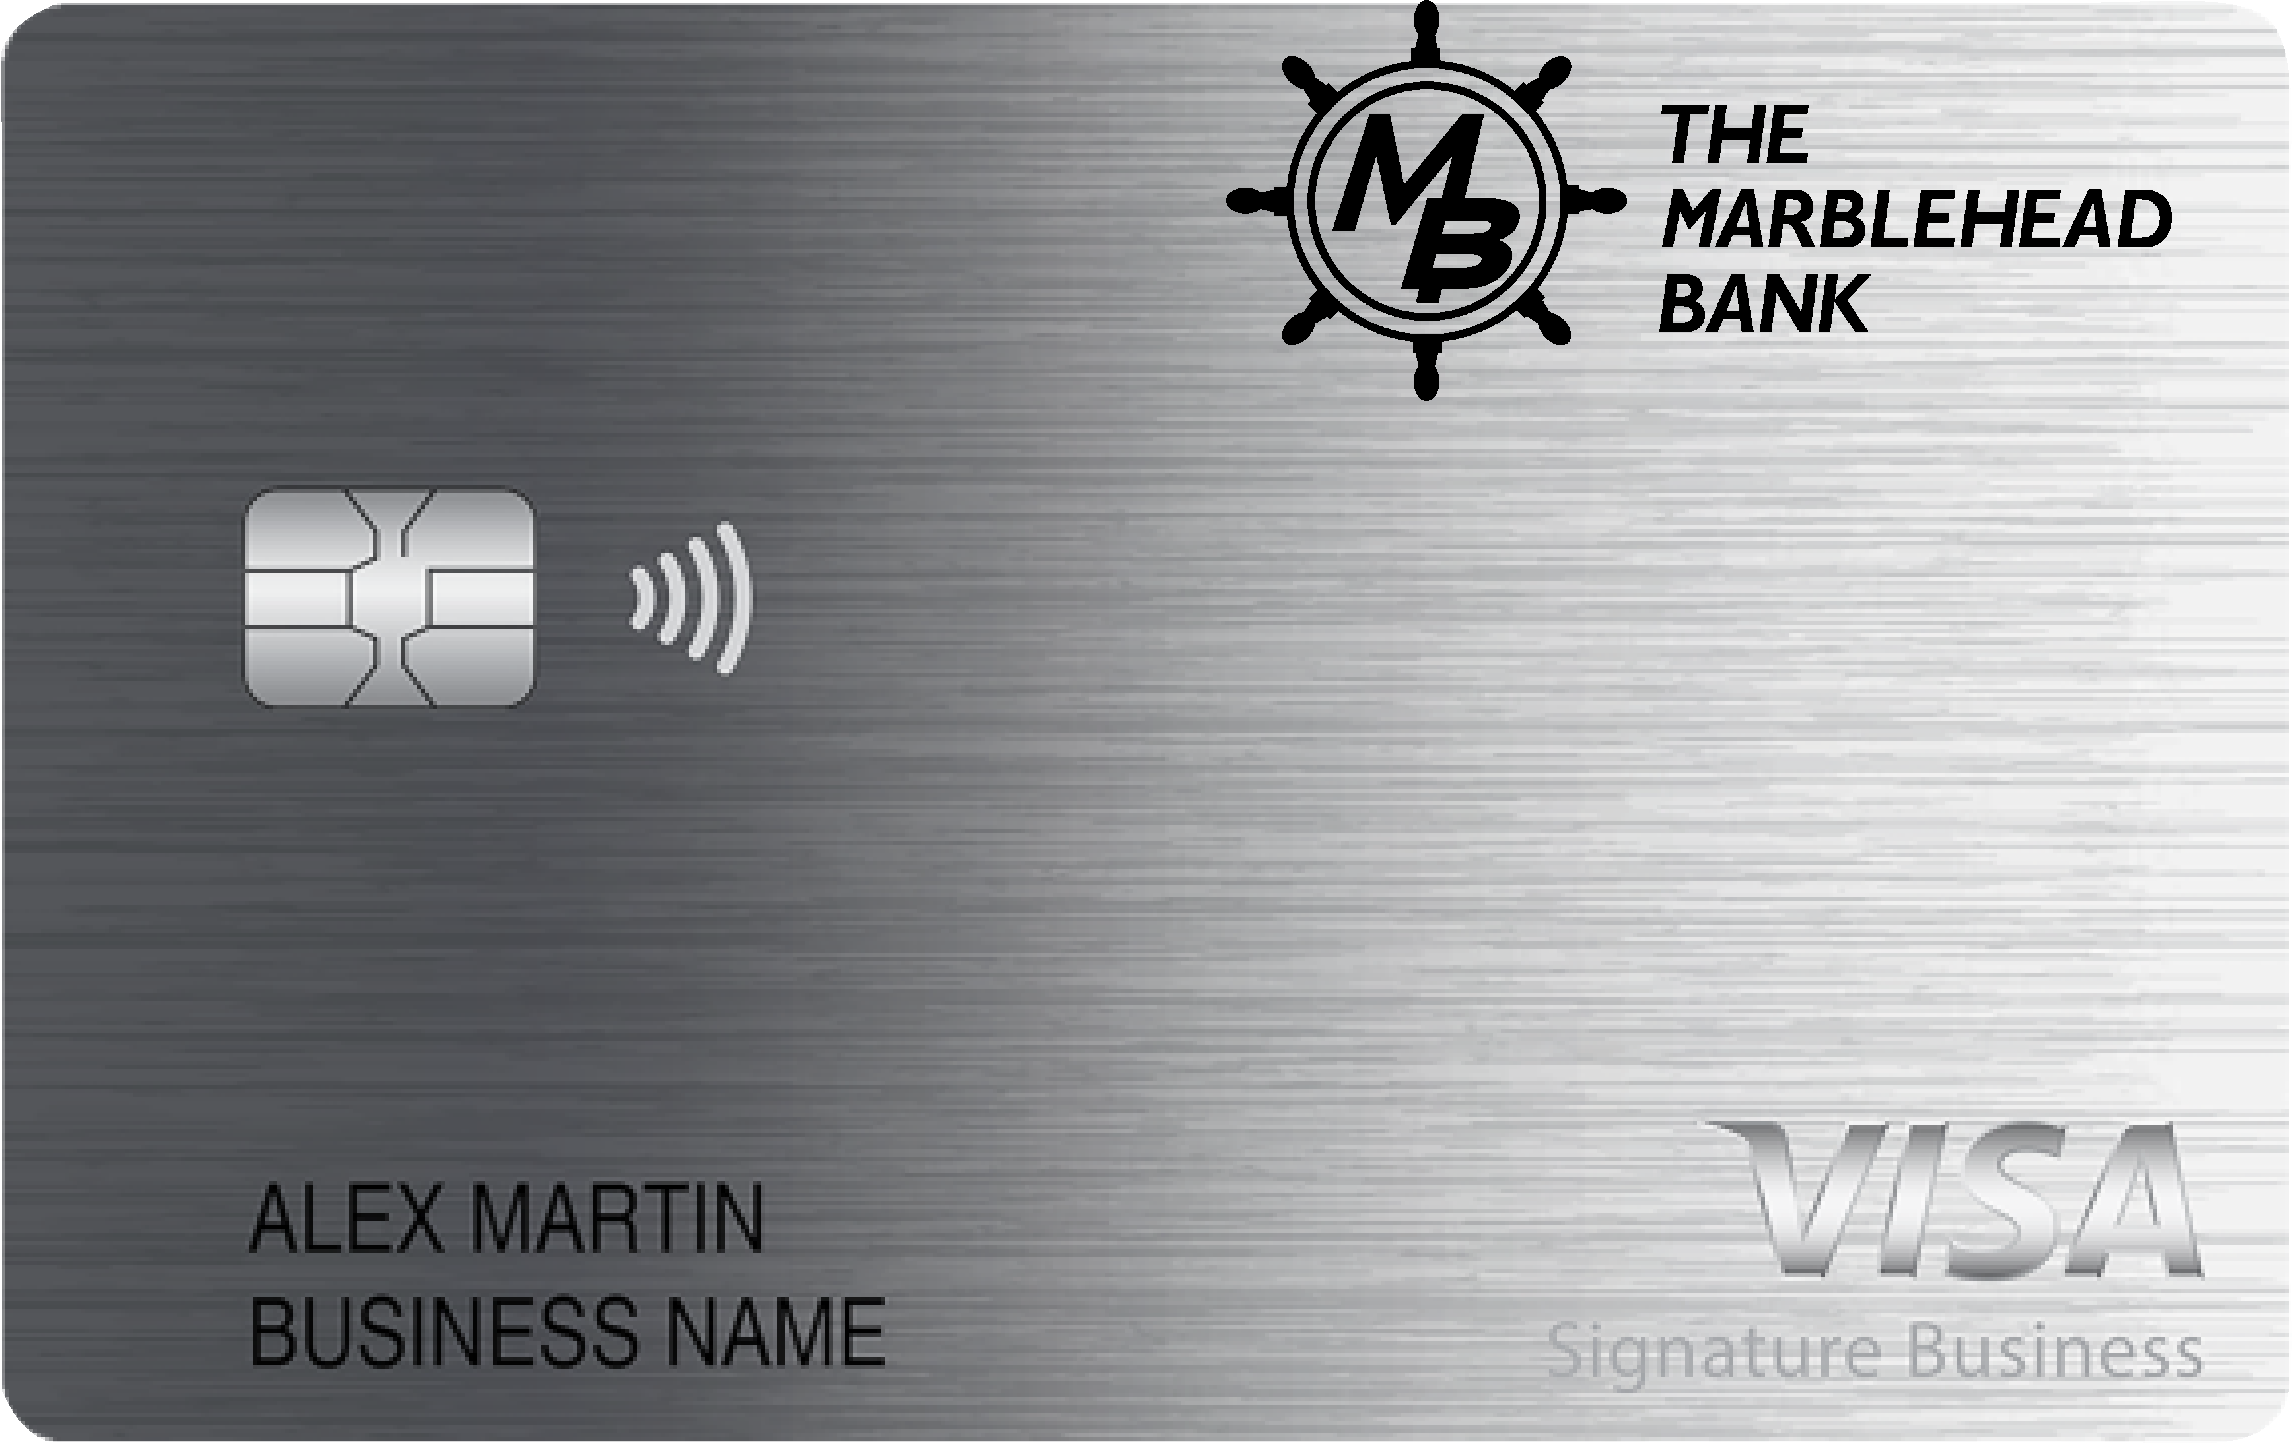 THE MARBLEHEAD BANK Smart Business Rewards Card